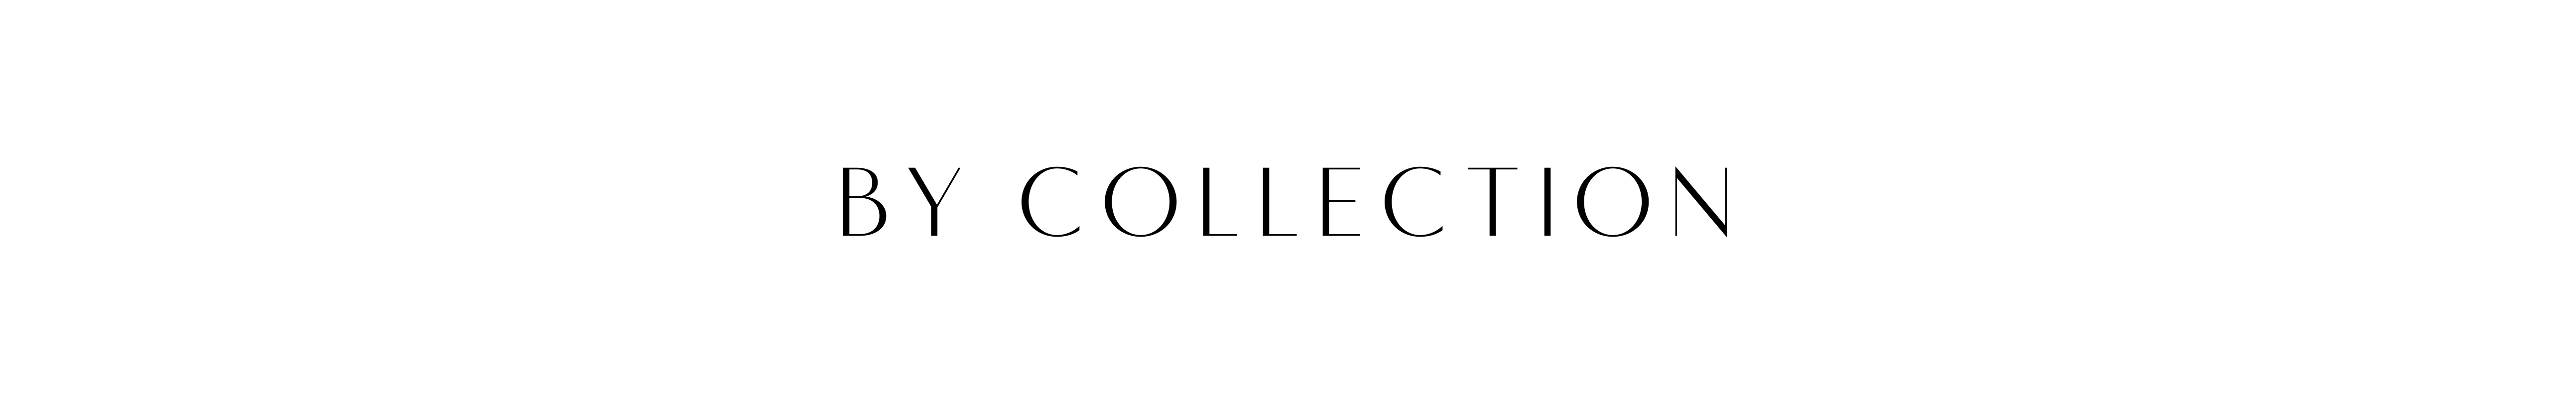 BY COLLECTION